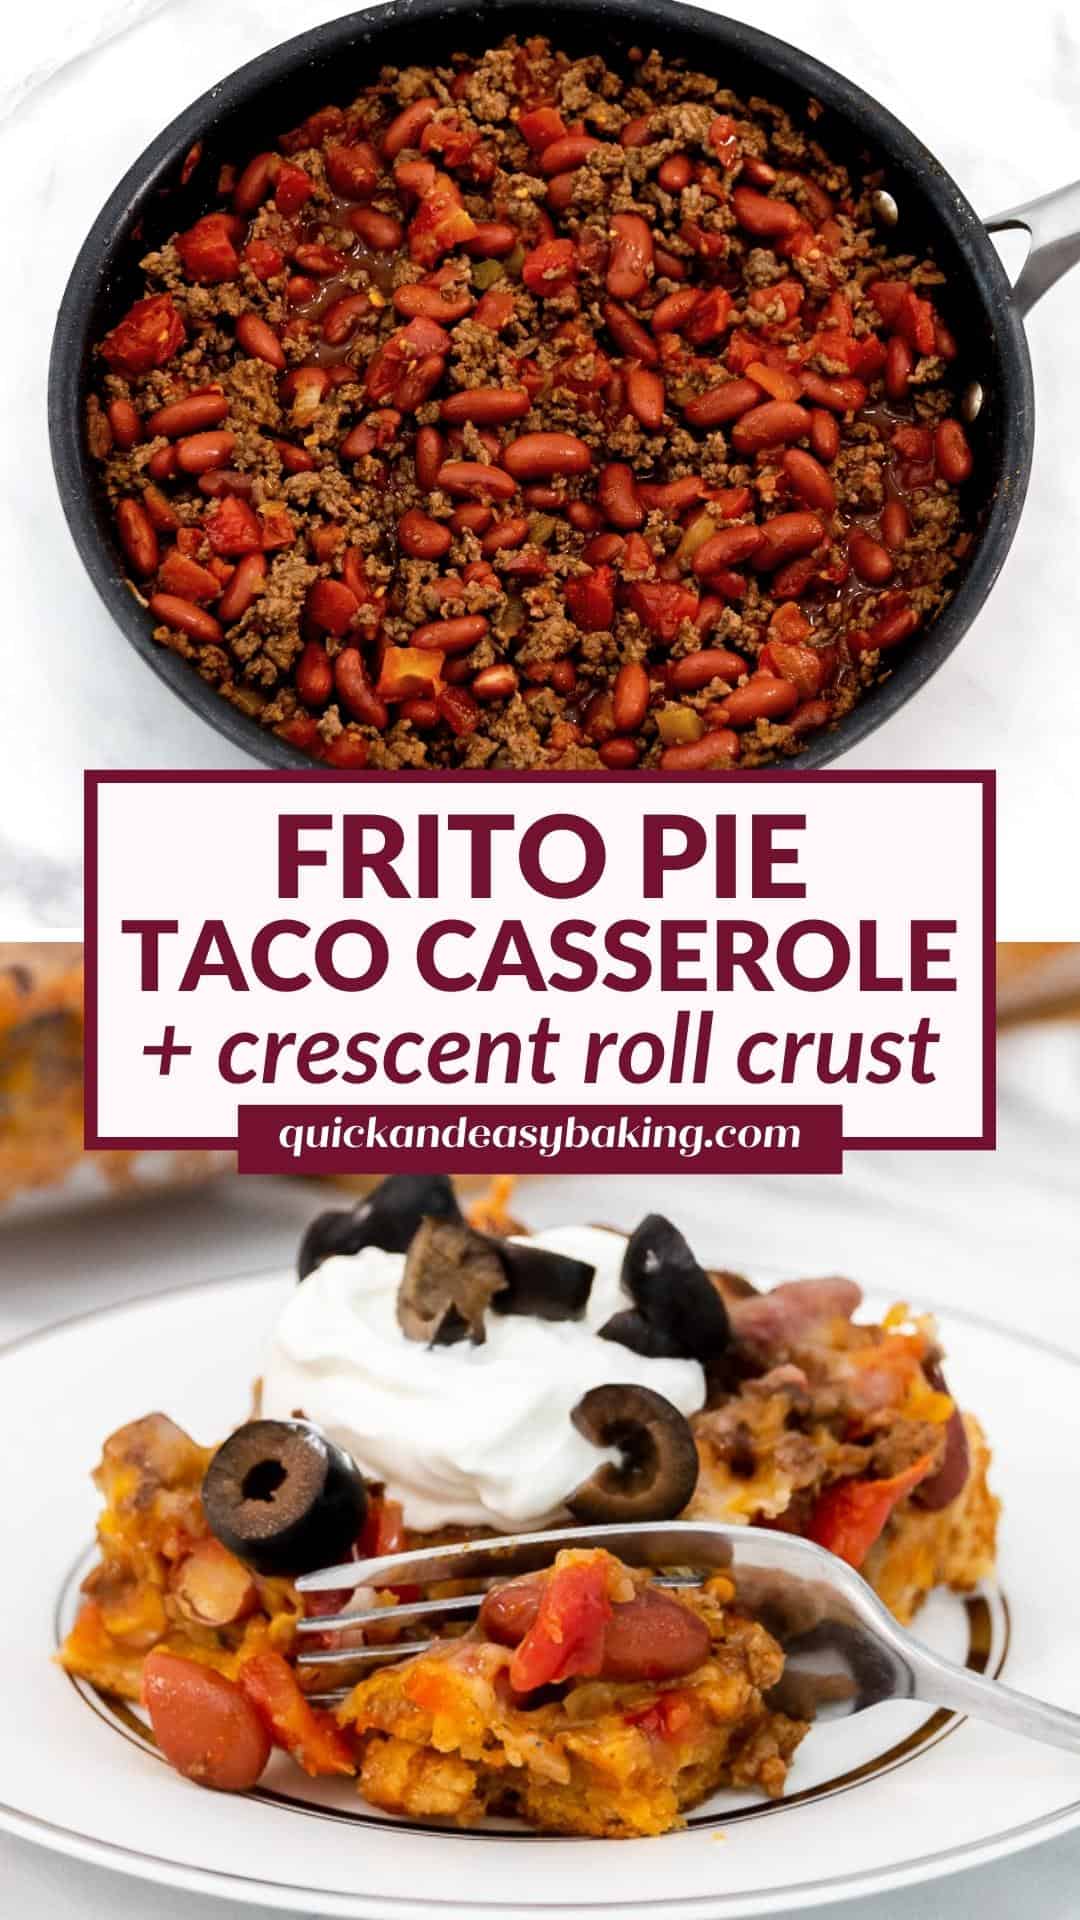 Pin image of frito pie taco casserole with text overlay.